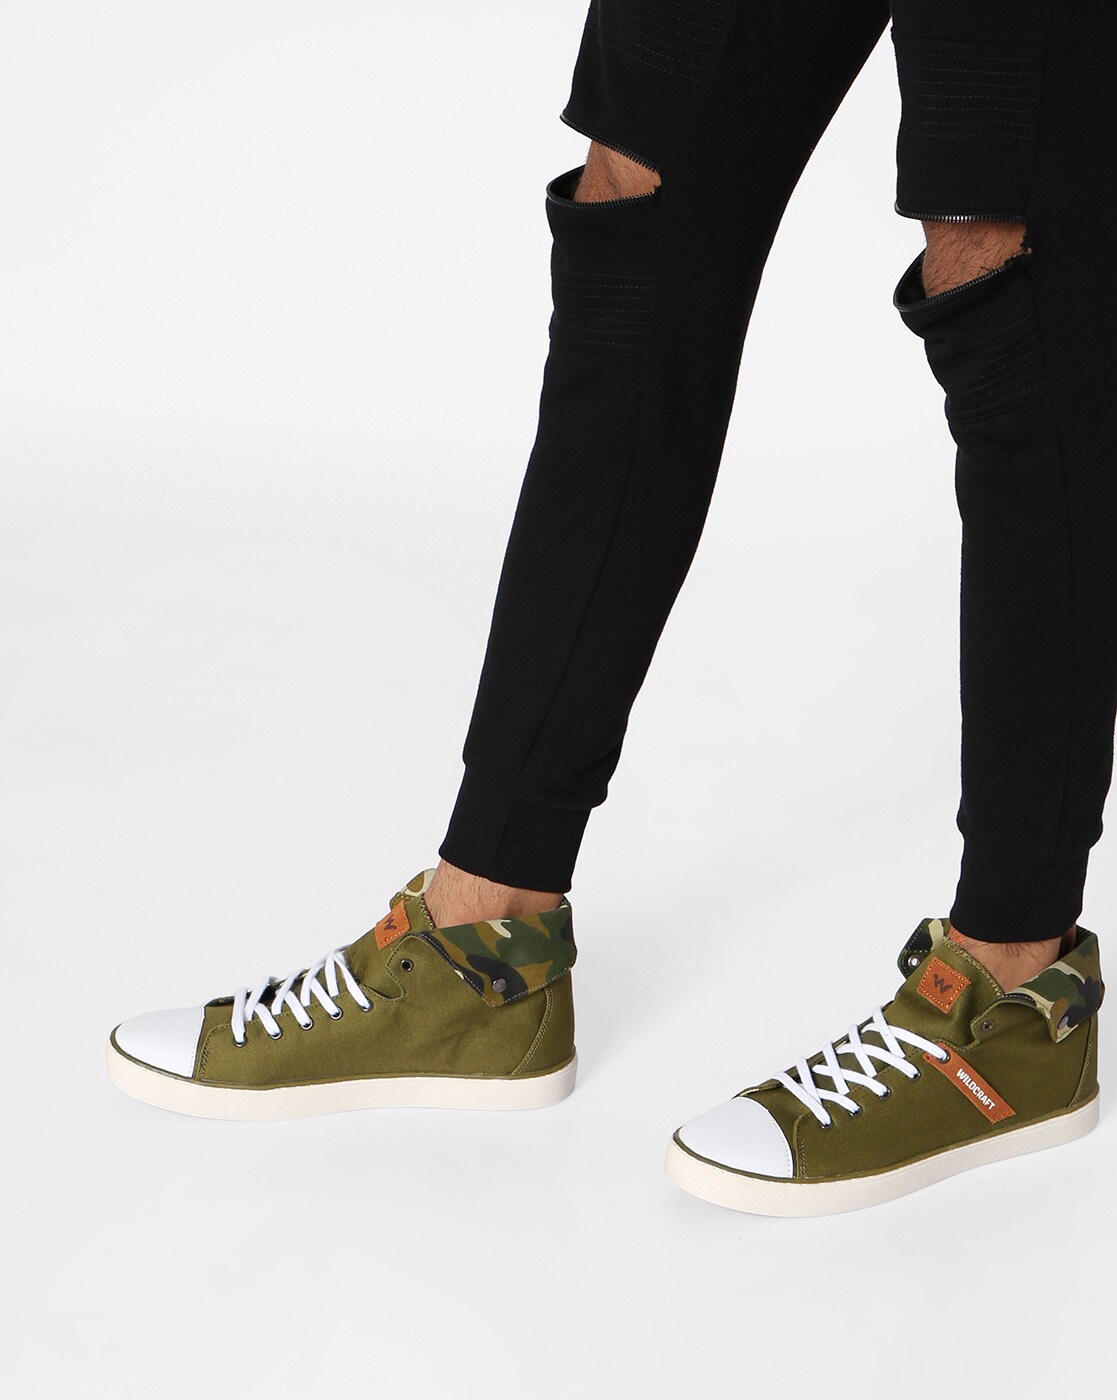 Buy Olive Green Casual Shoes for Men by 